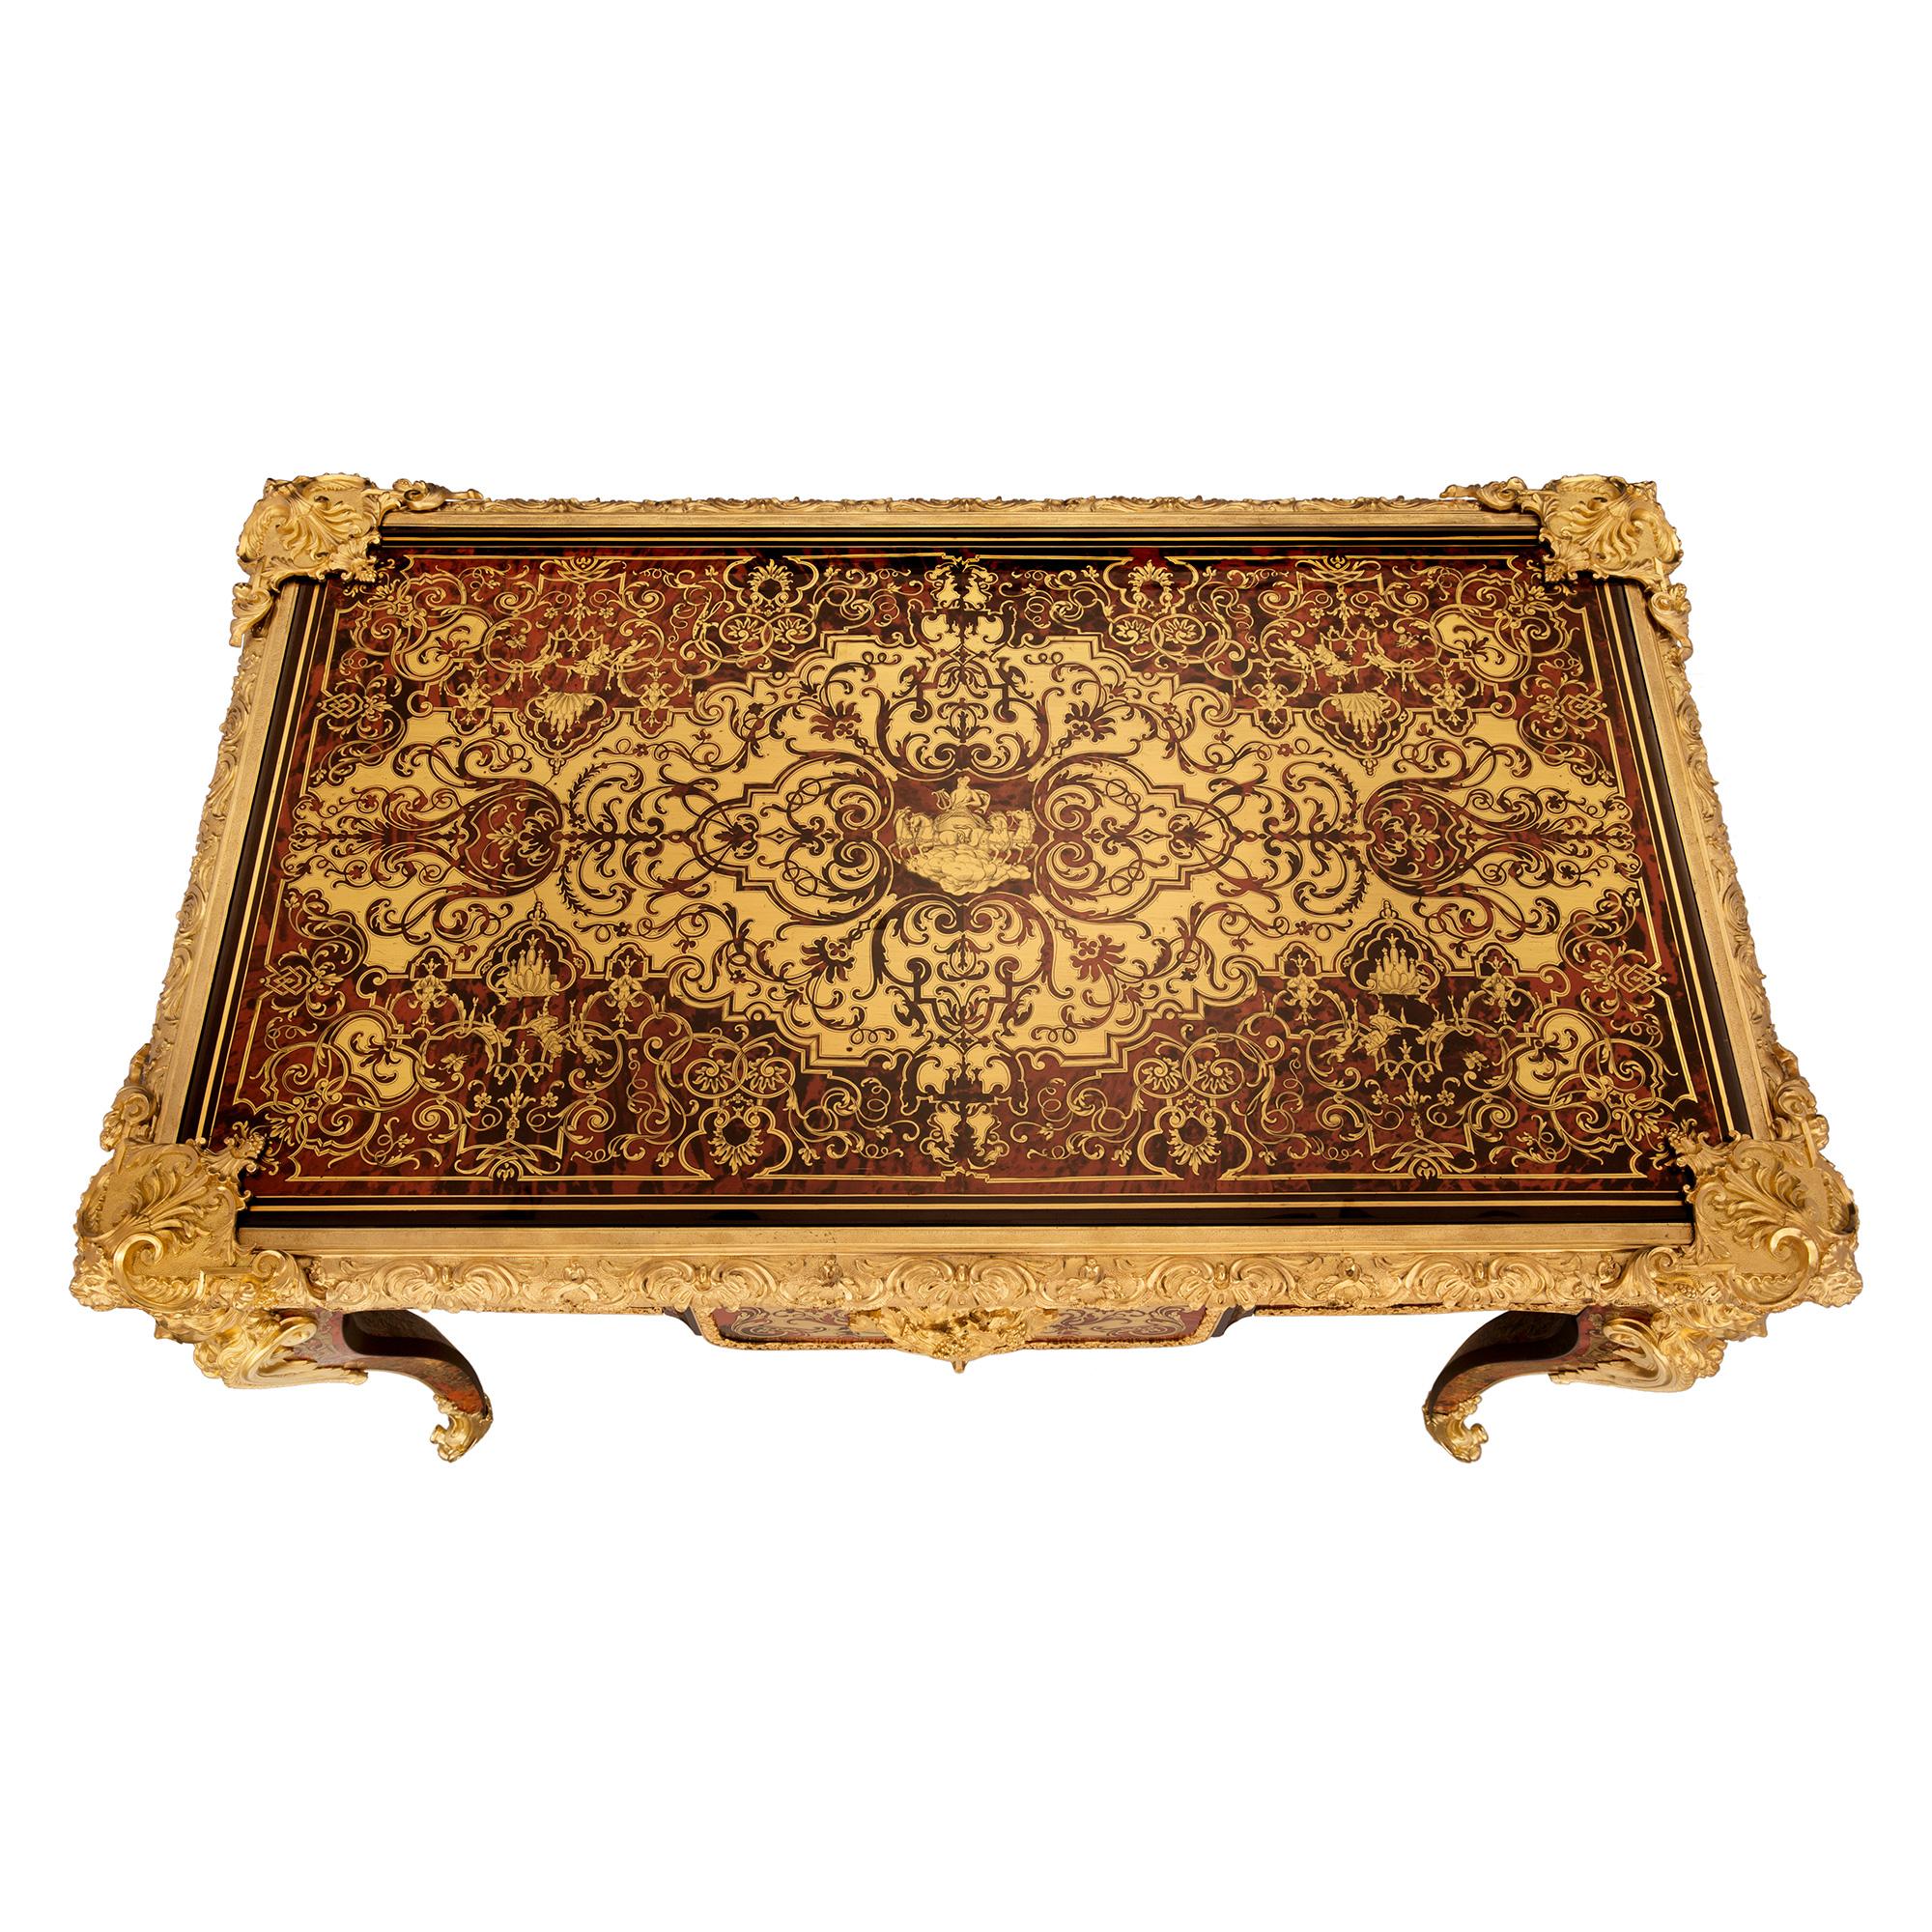 A stunning and extremely high-quality French 19th century Louis XV st. Napoleon III period tortoiseshell, ormolu, and brass inlaid desk signed Caillaux. The most impressive desk is raised by elegant cabriole legs with fine-fitted ormolu foliate